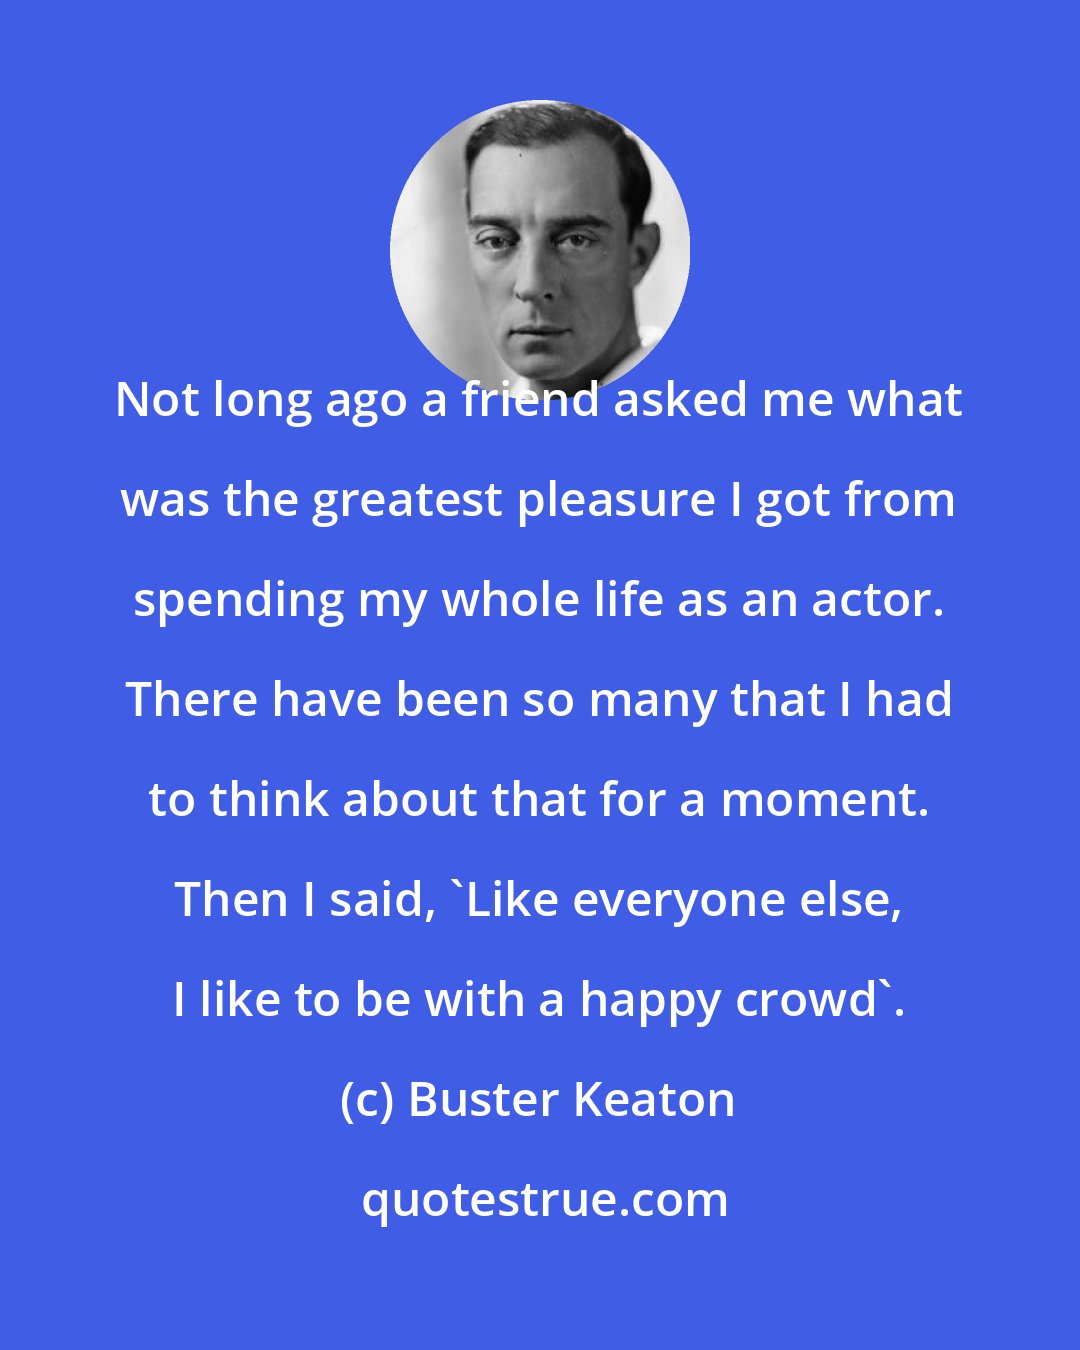 Buster Keaton: Not long ago a friend asked me what was the greatest pleasure I got from spending my whole life as an actor. There have been so many that I had to think about that for a moment. Then I said, 'Like everyone else, I like to be with a happy crowd'.